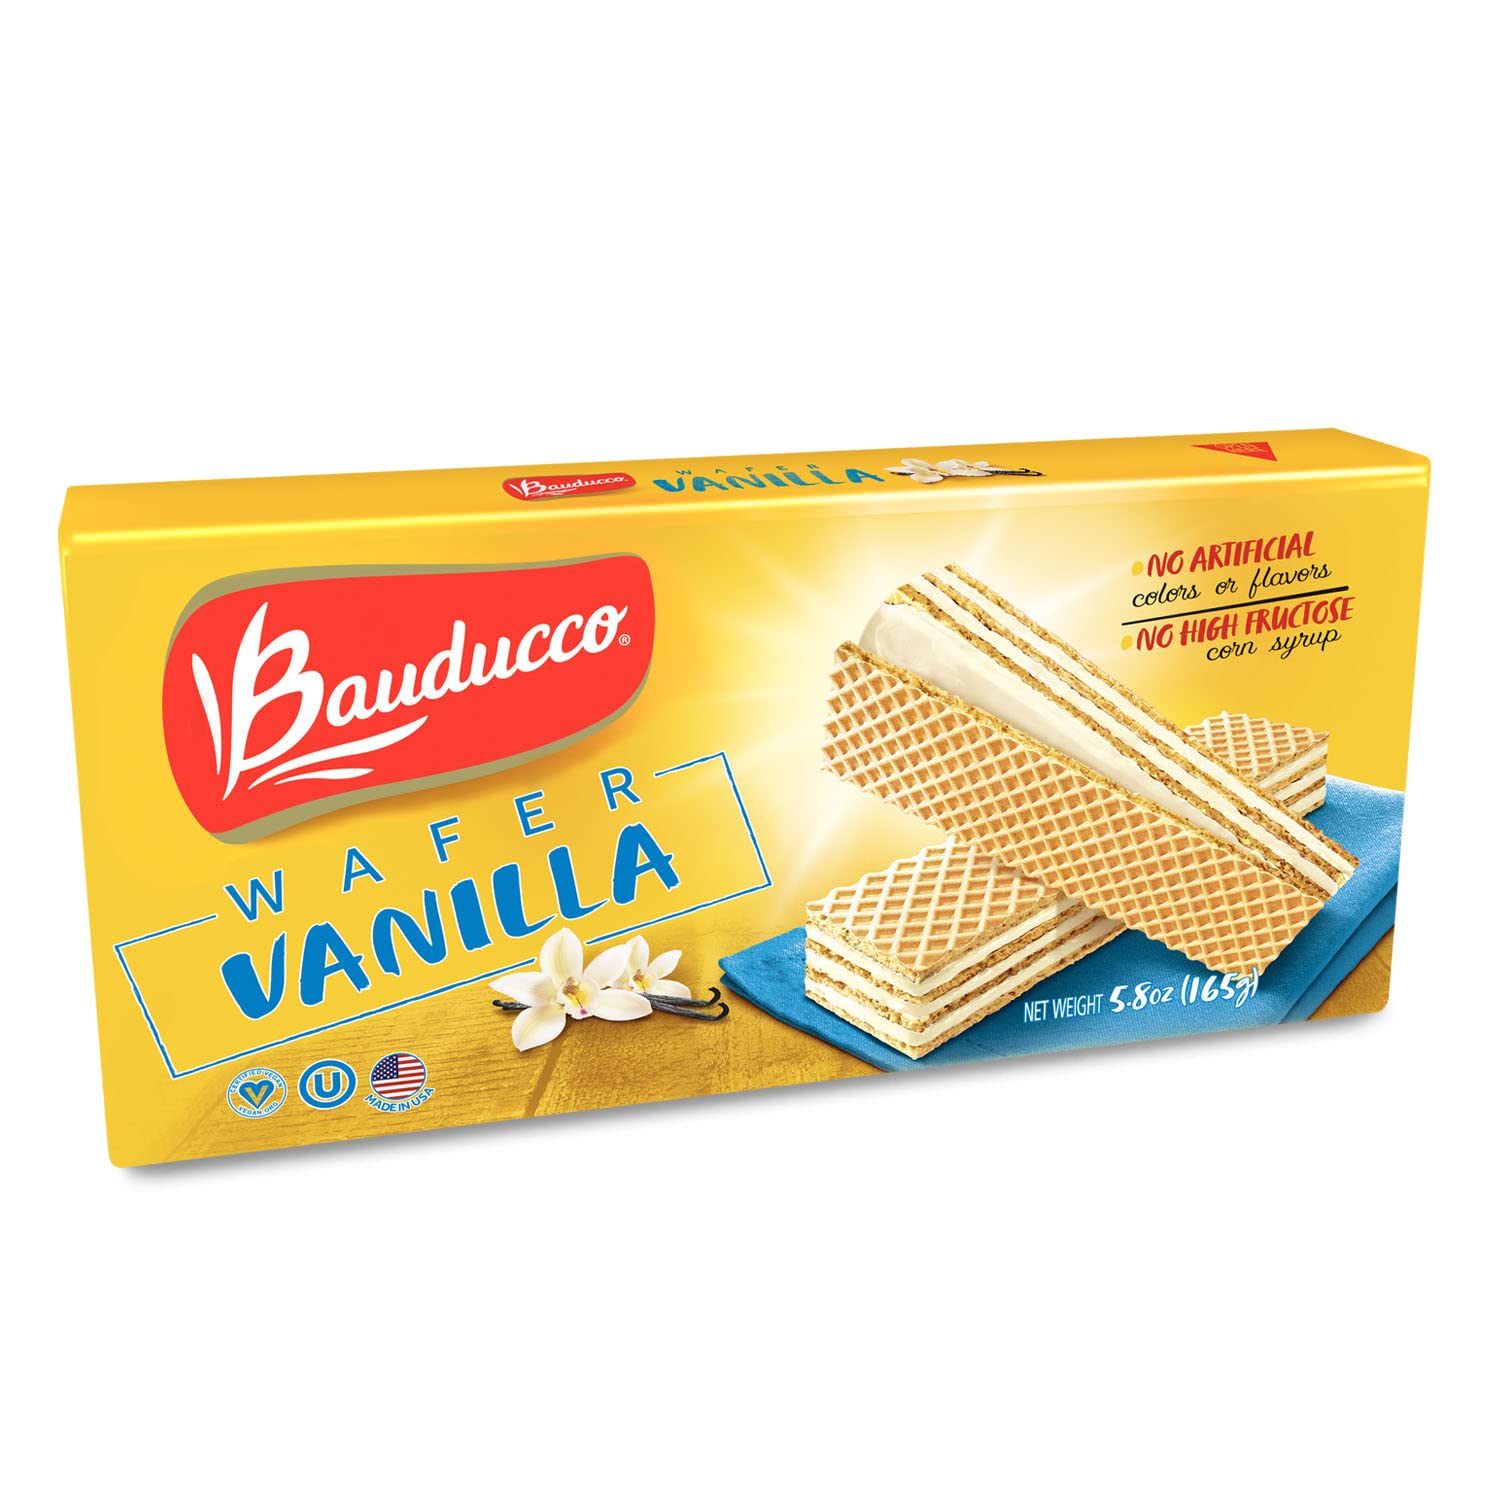 Bauducco Chocolate Wafers - Crispy Wafer Cookies With 3 Delicious, Indulgent Decadent Layers of Chocolate Flavored Cream - Delicious Sweet Snack or Desert - 5.82oz (Pack of 1)